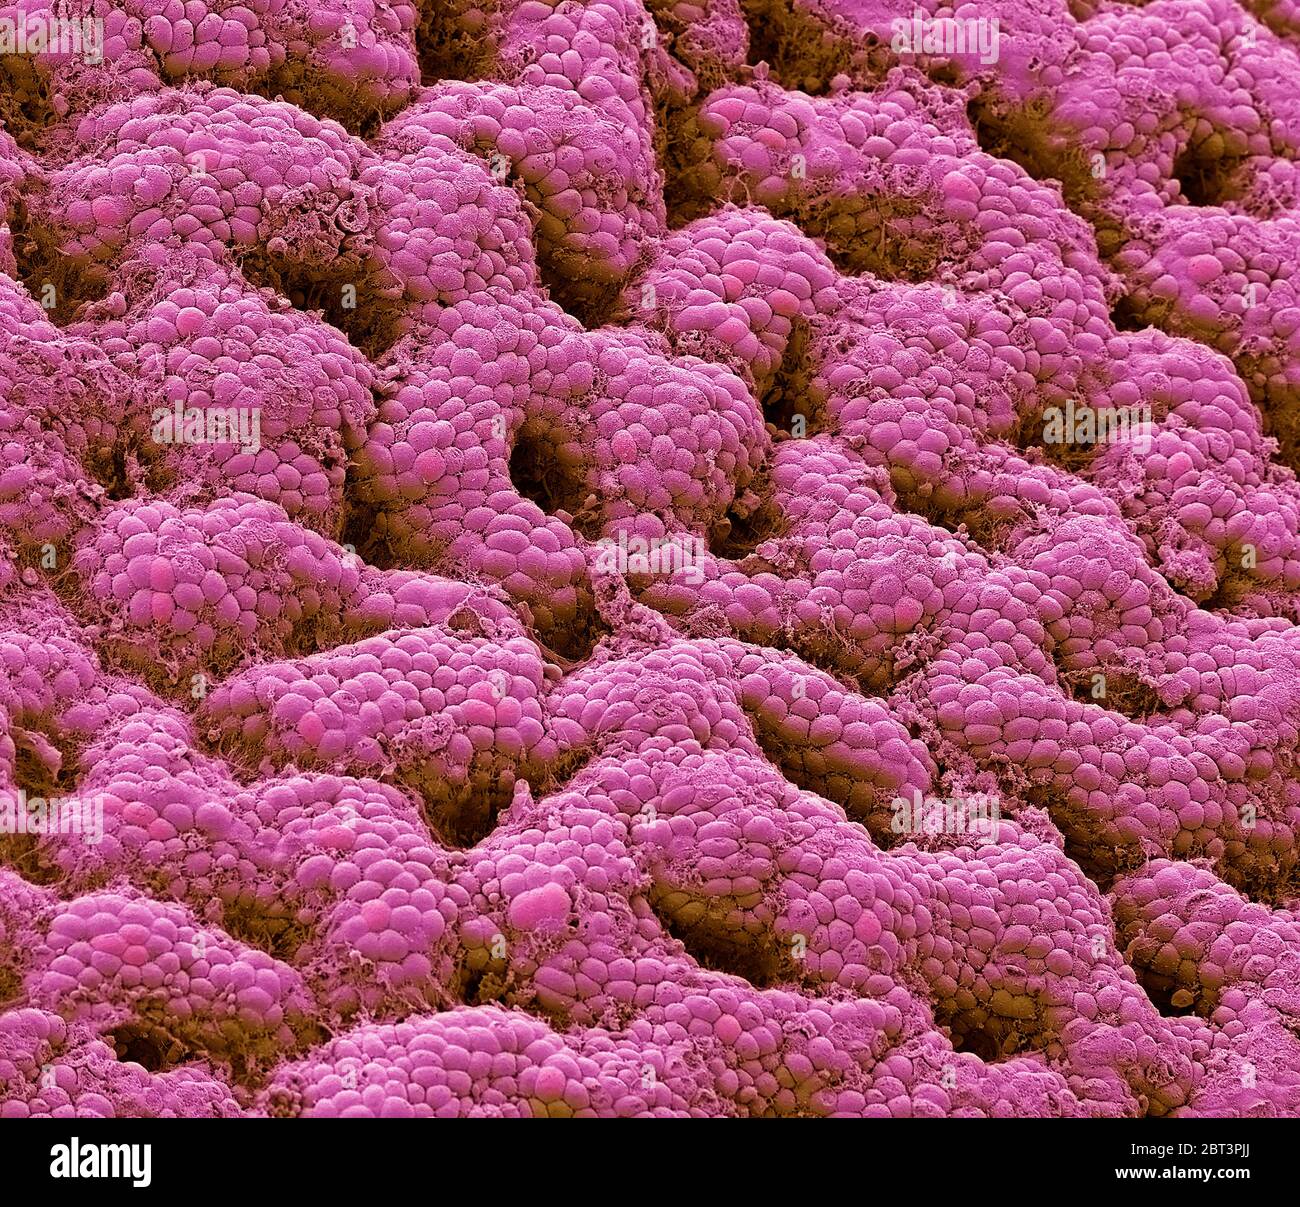 Stomach lining. Coloured scanning electron micrograph (SEM) of the glandular lining (mucosa) of the stomach. The gastric mucosa secretes the digestive Stock Photo